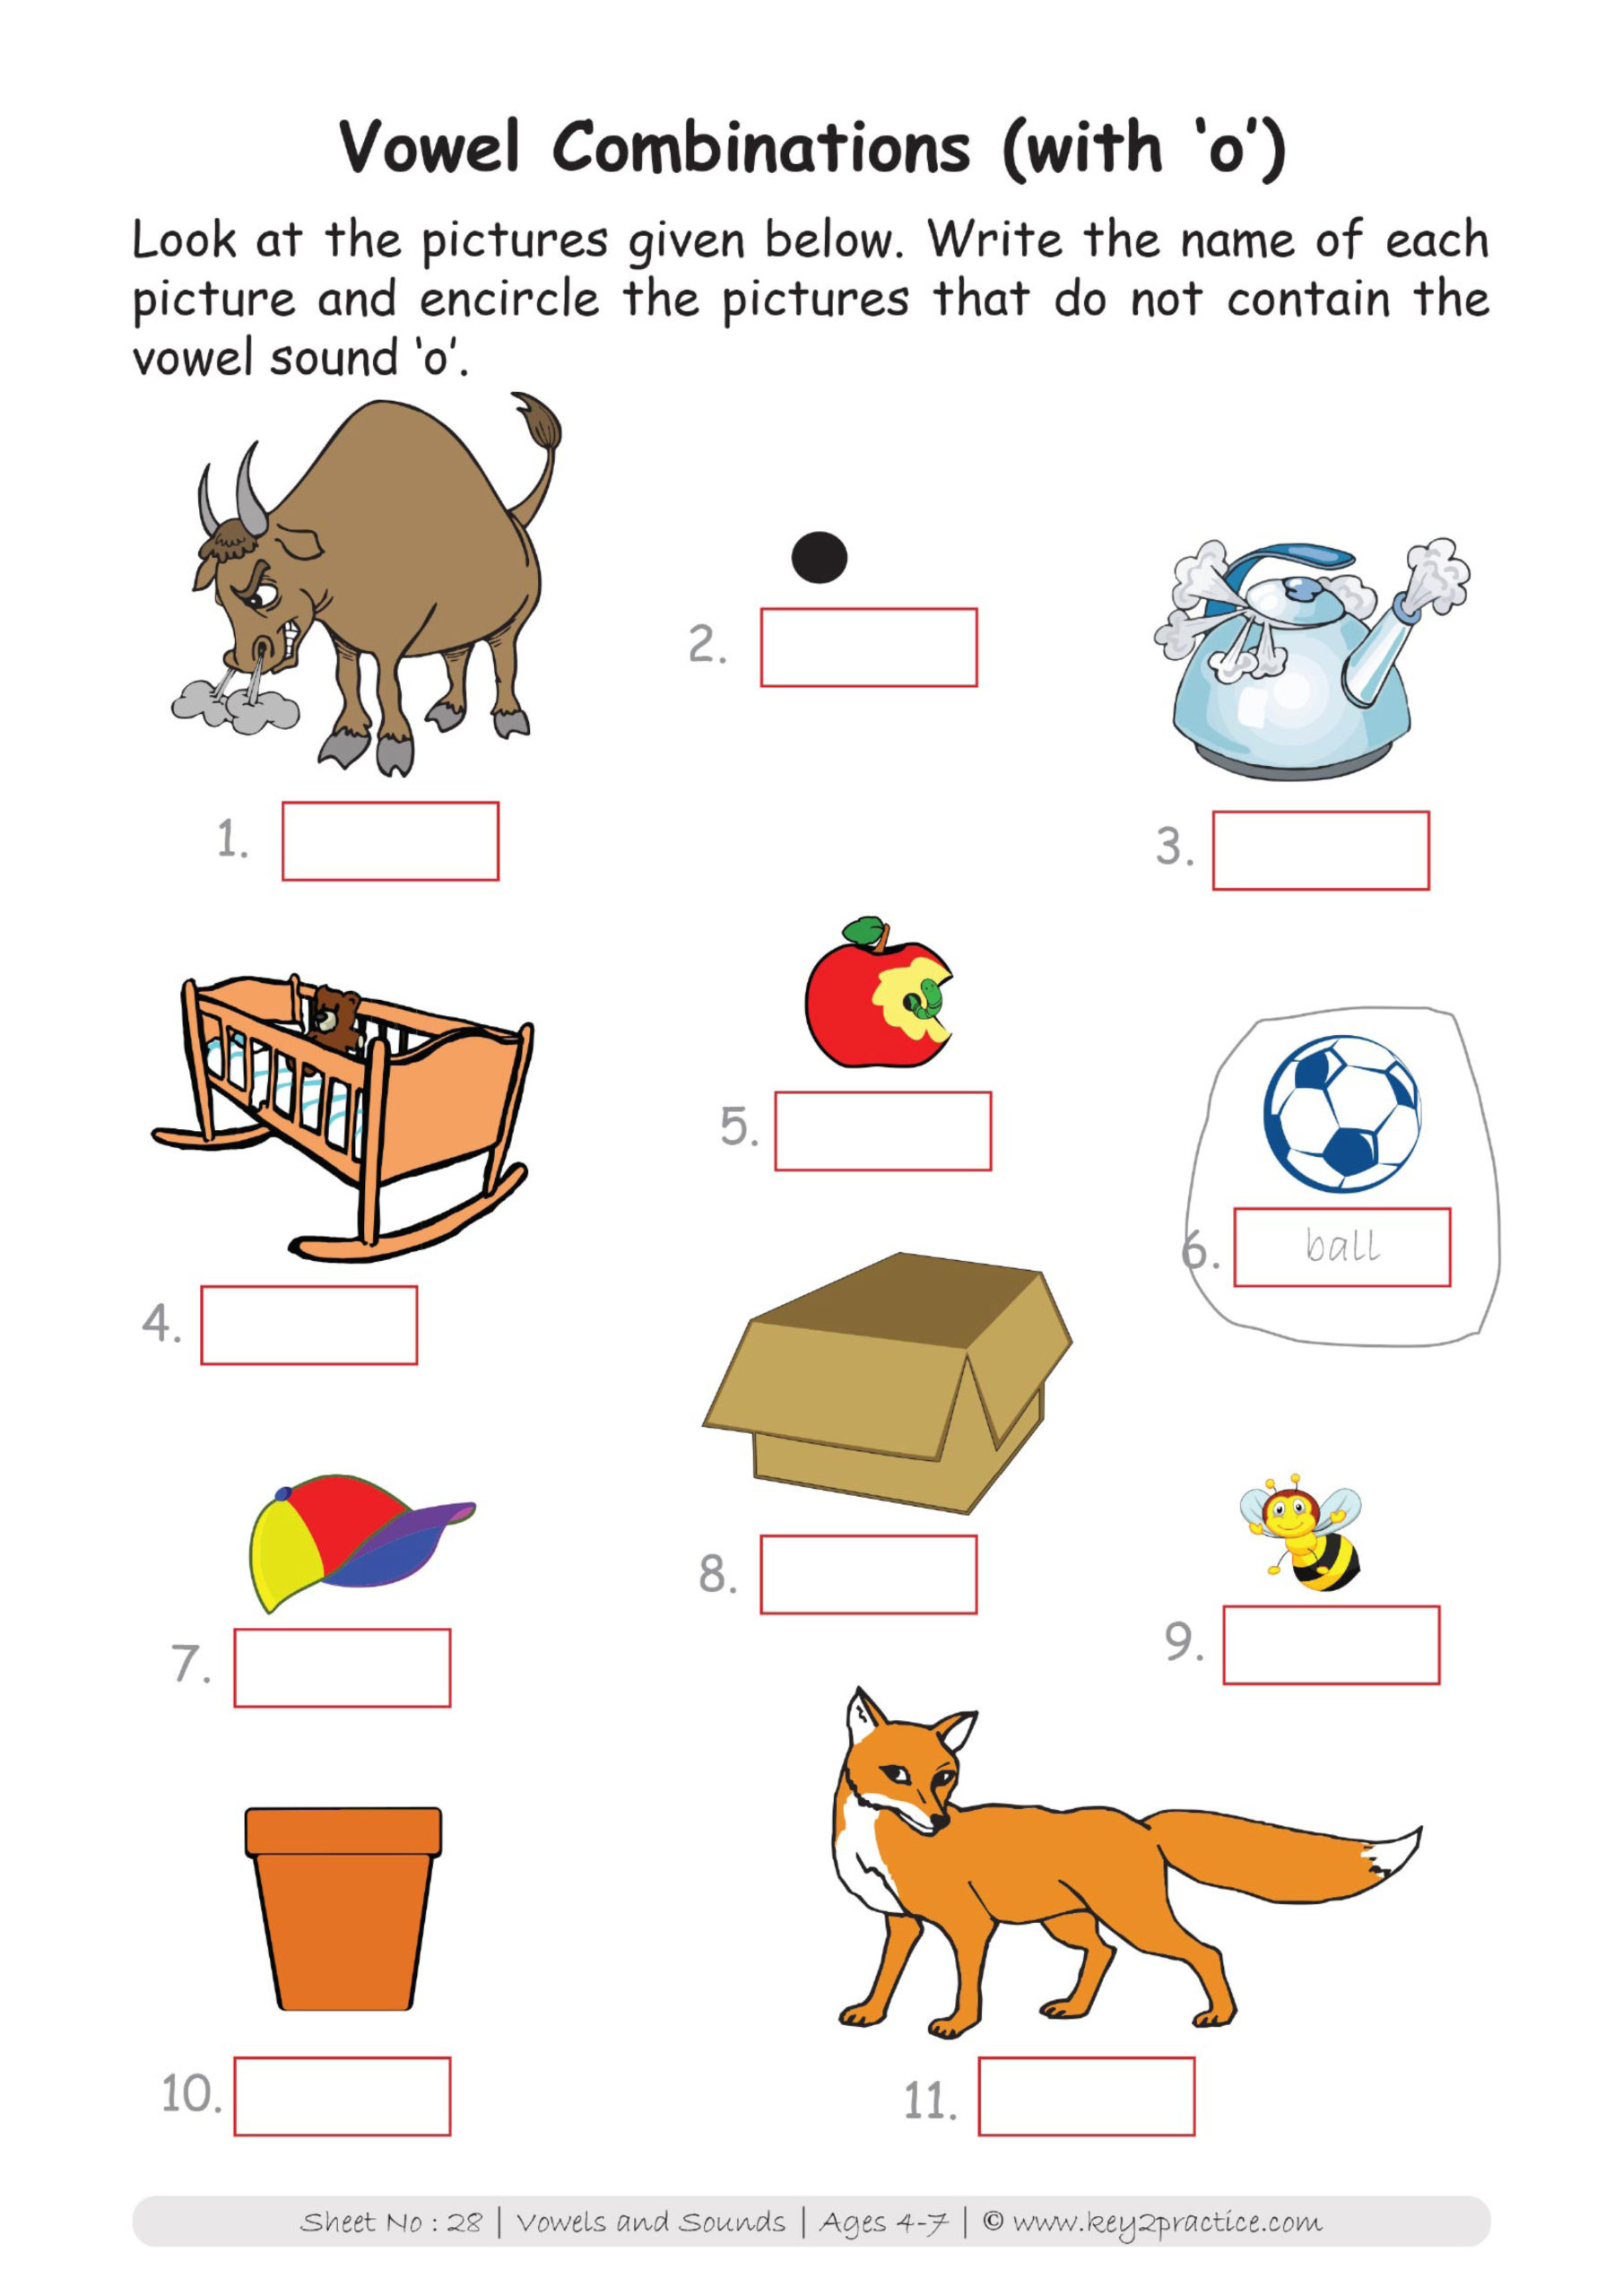 vowels-and-consonants-worksheets-i-pre-primary-classes-key2practice